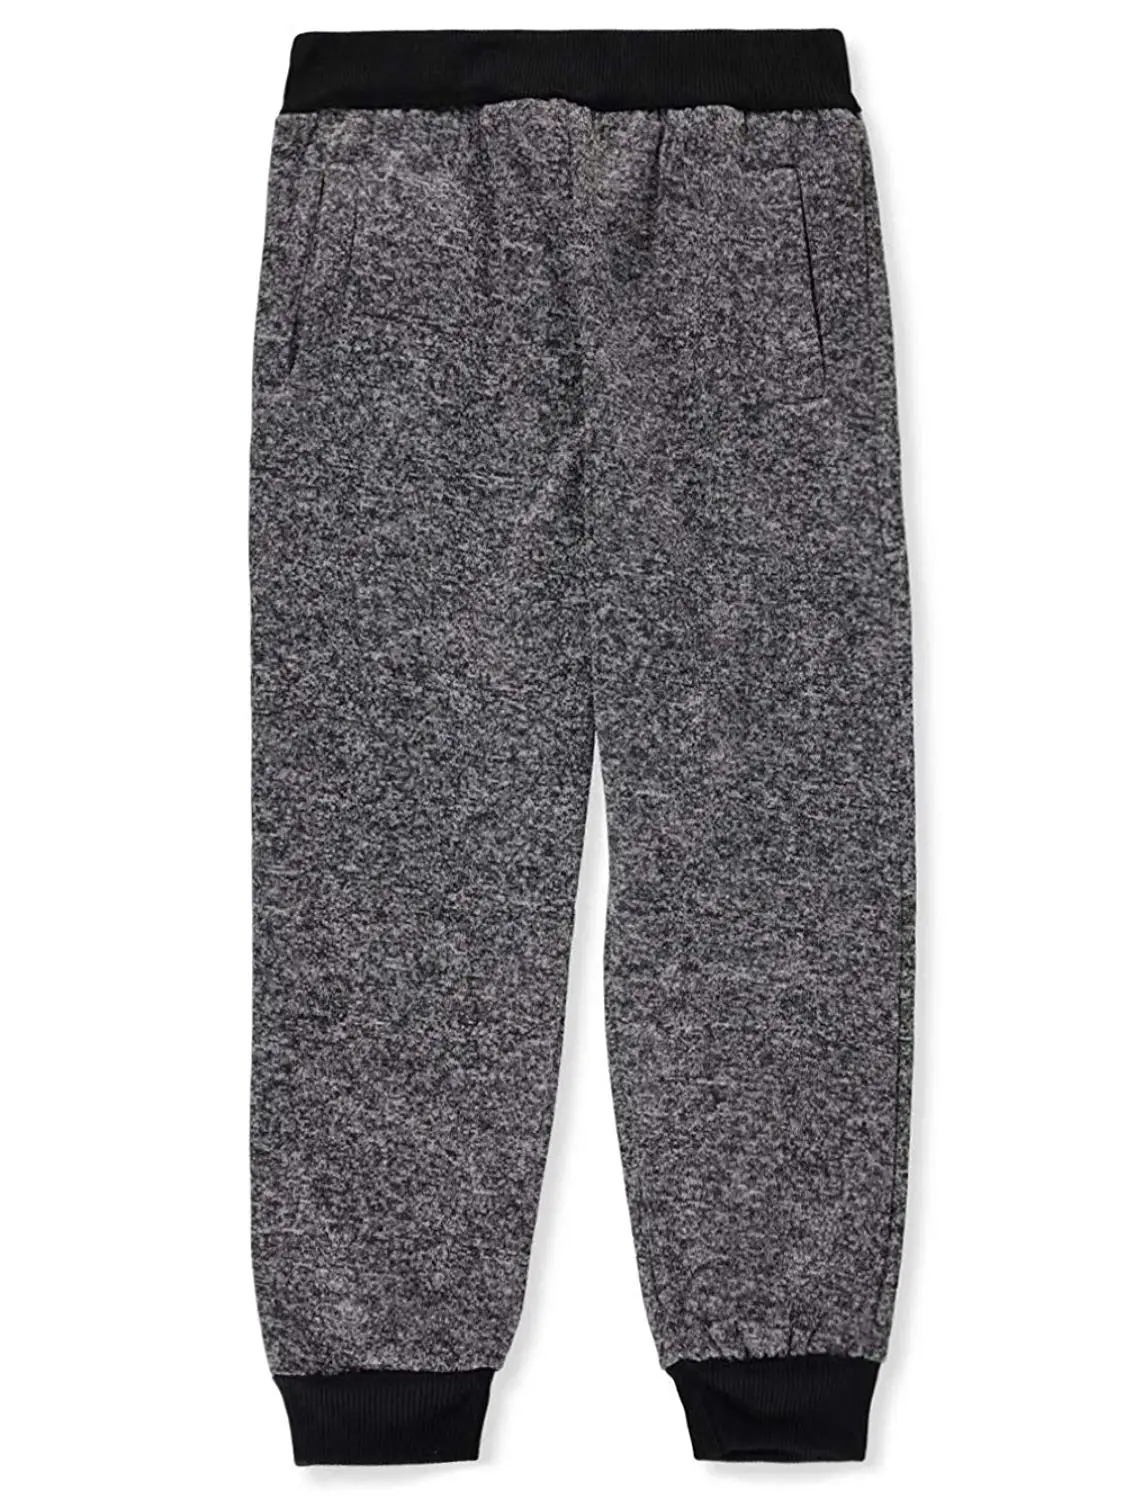 Cheap Boys Grey Joggers, find Boys Grey Joggers deals on line at ...